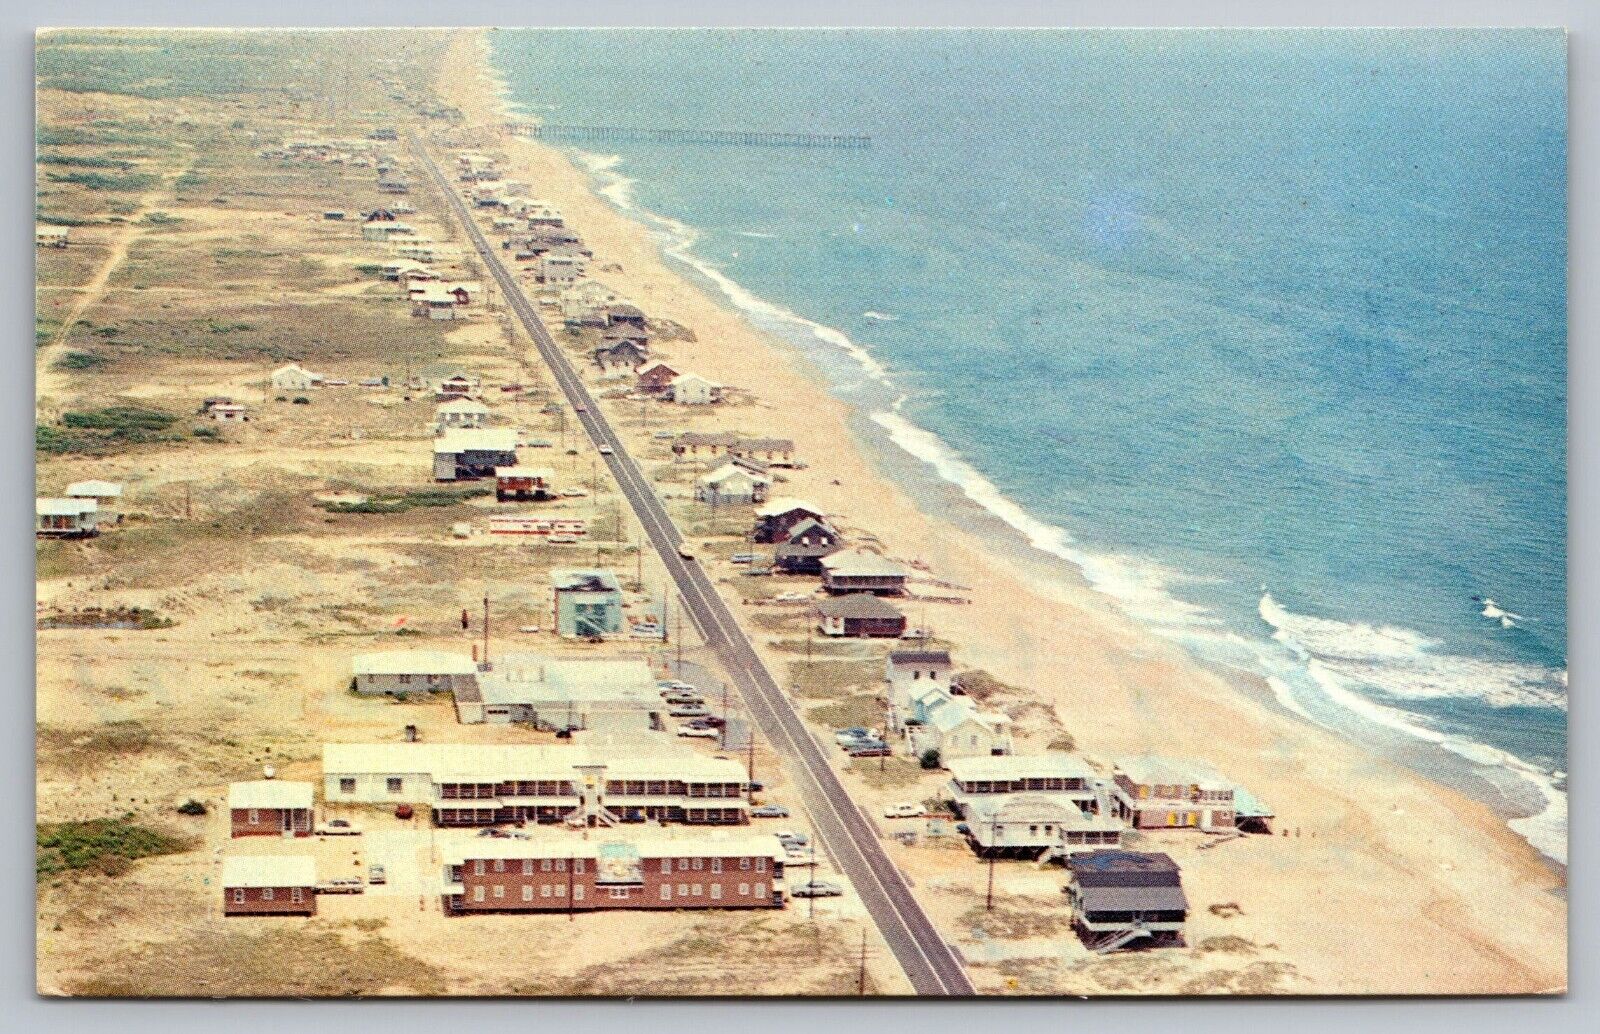 The Outer Banks-Kitty Hawk NC Postcard c1974–Rare Vintage Aerial View